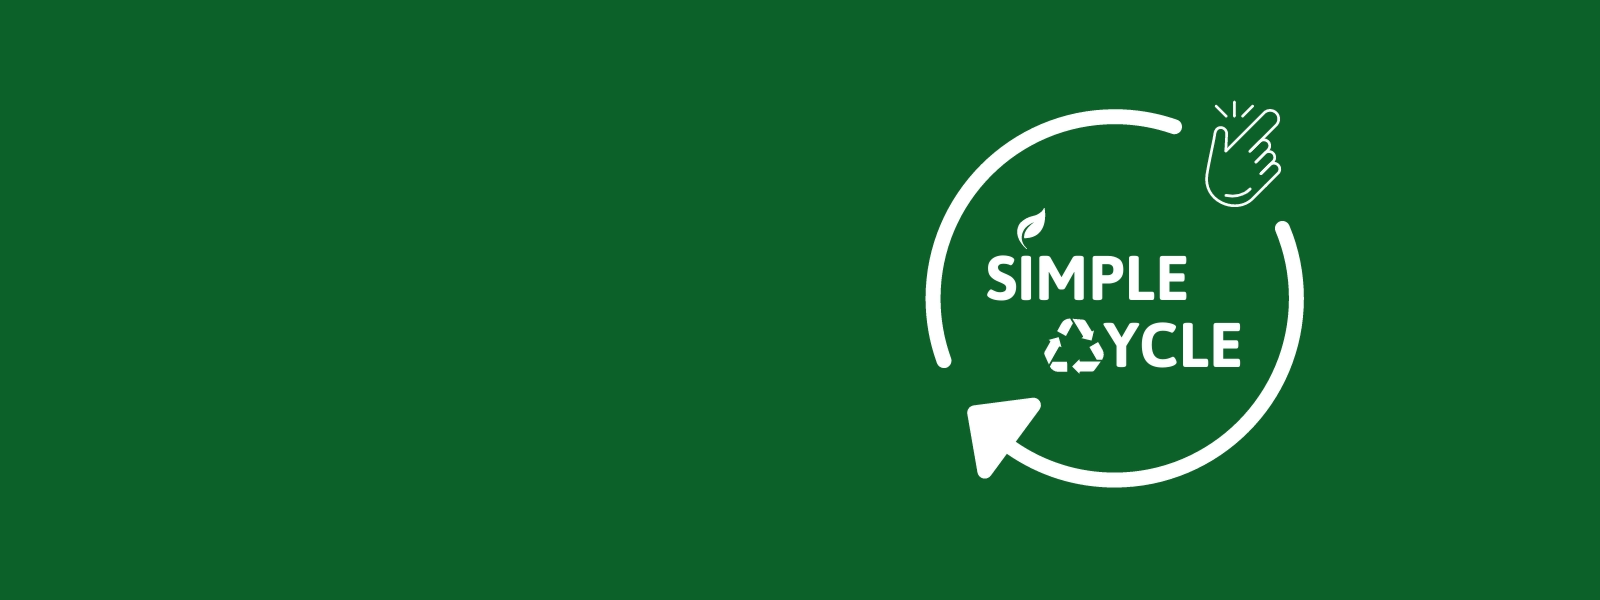 SimpleCycle logo: a round arrow that circles around the words SimpleCycle. Simple has a leaf on the i and Cycle has a recycling logo over the c. There is a hand in the middle of the arrow denoting a snap of the fingers. All in white on a green background.